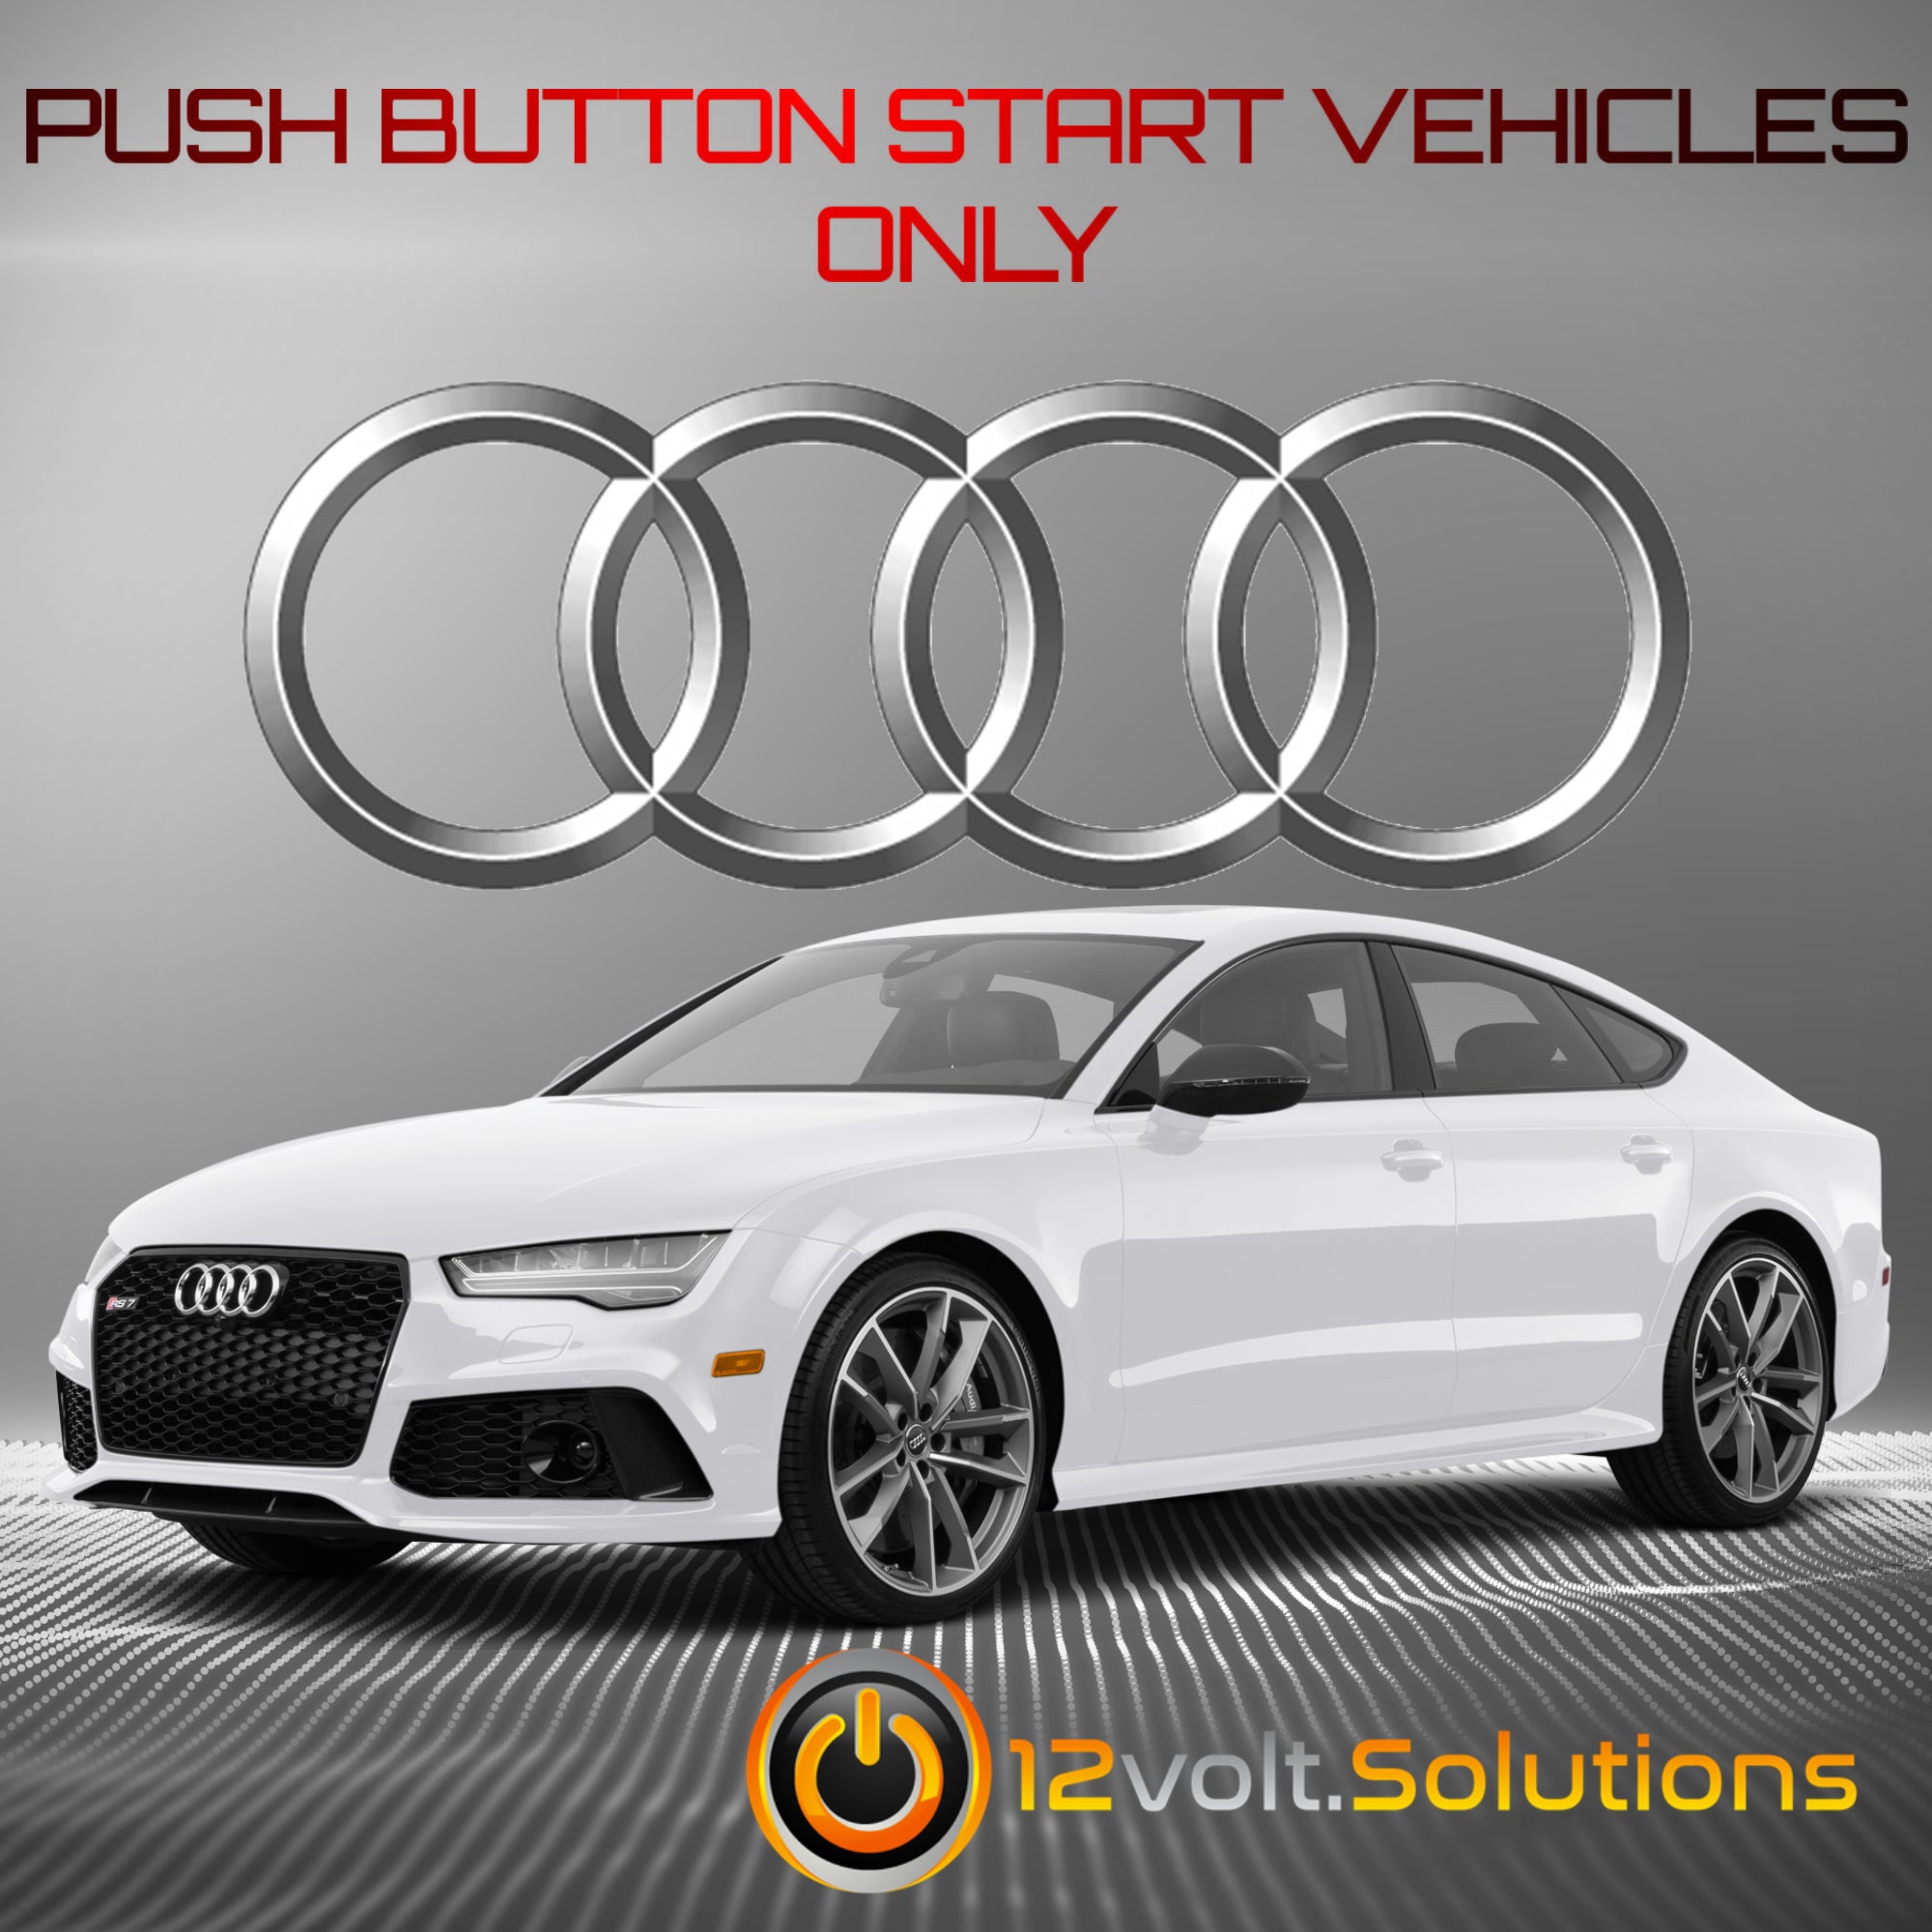 2013-2018 Audi S8 Plug and Play Remote Start Kit-12Volt.Solutions